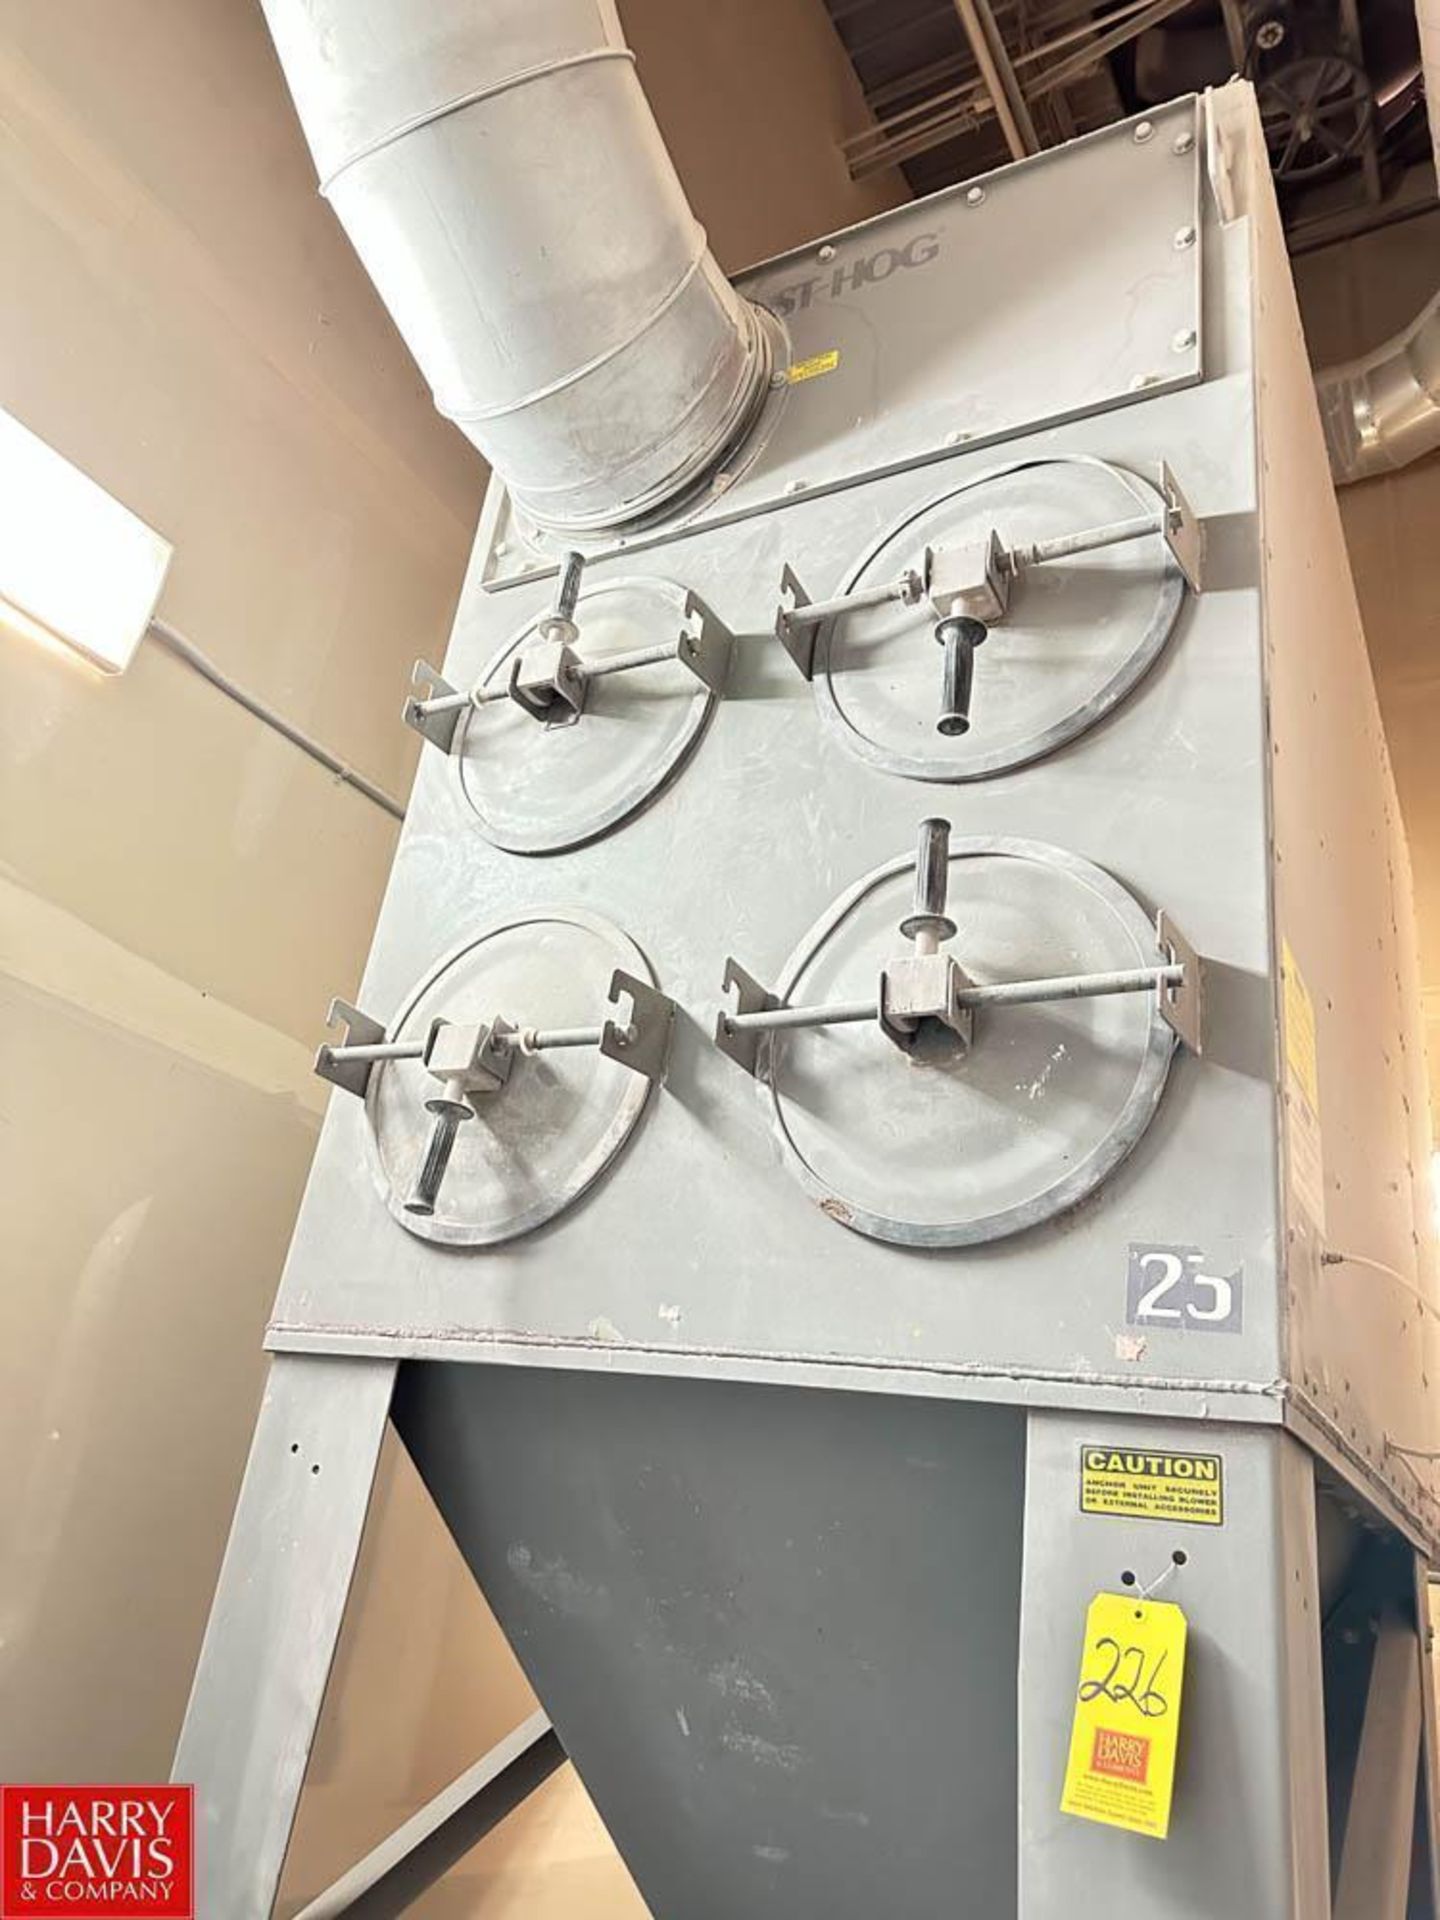 United Air Specialists Dust-Hog Dust Collector, Model: SBD8-2 - Rigging Fee: $850 - Image 2 of 6